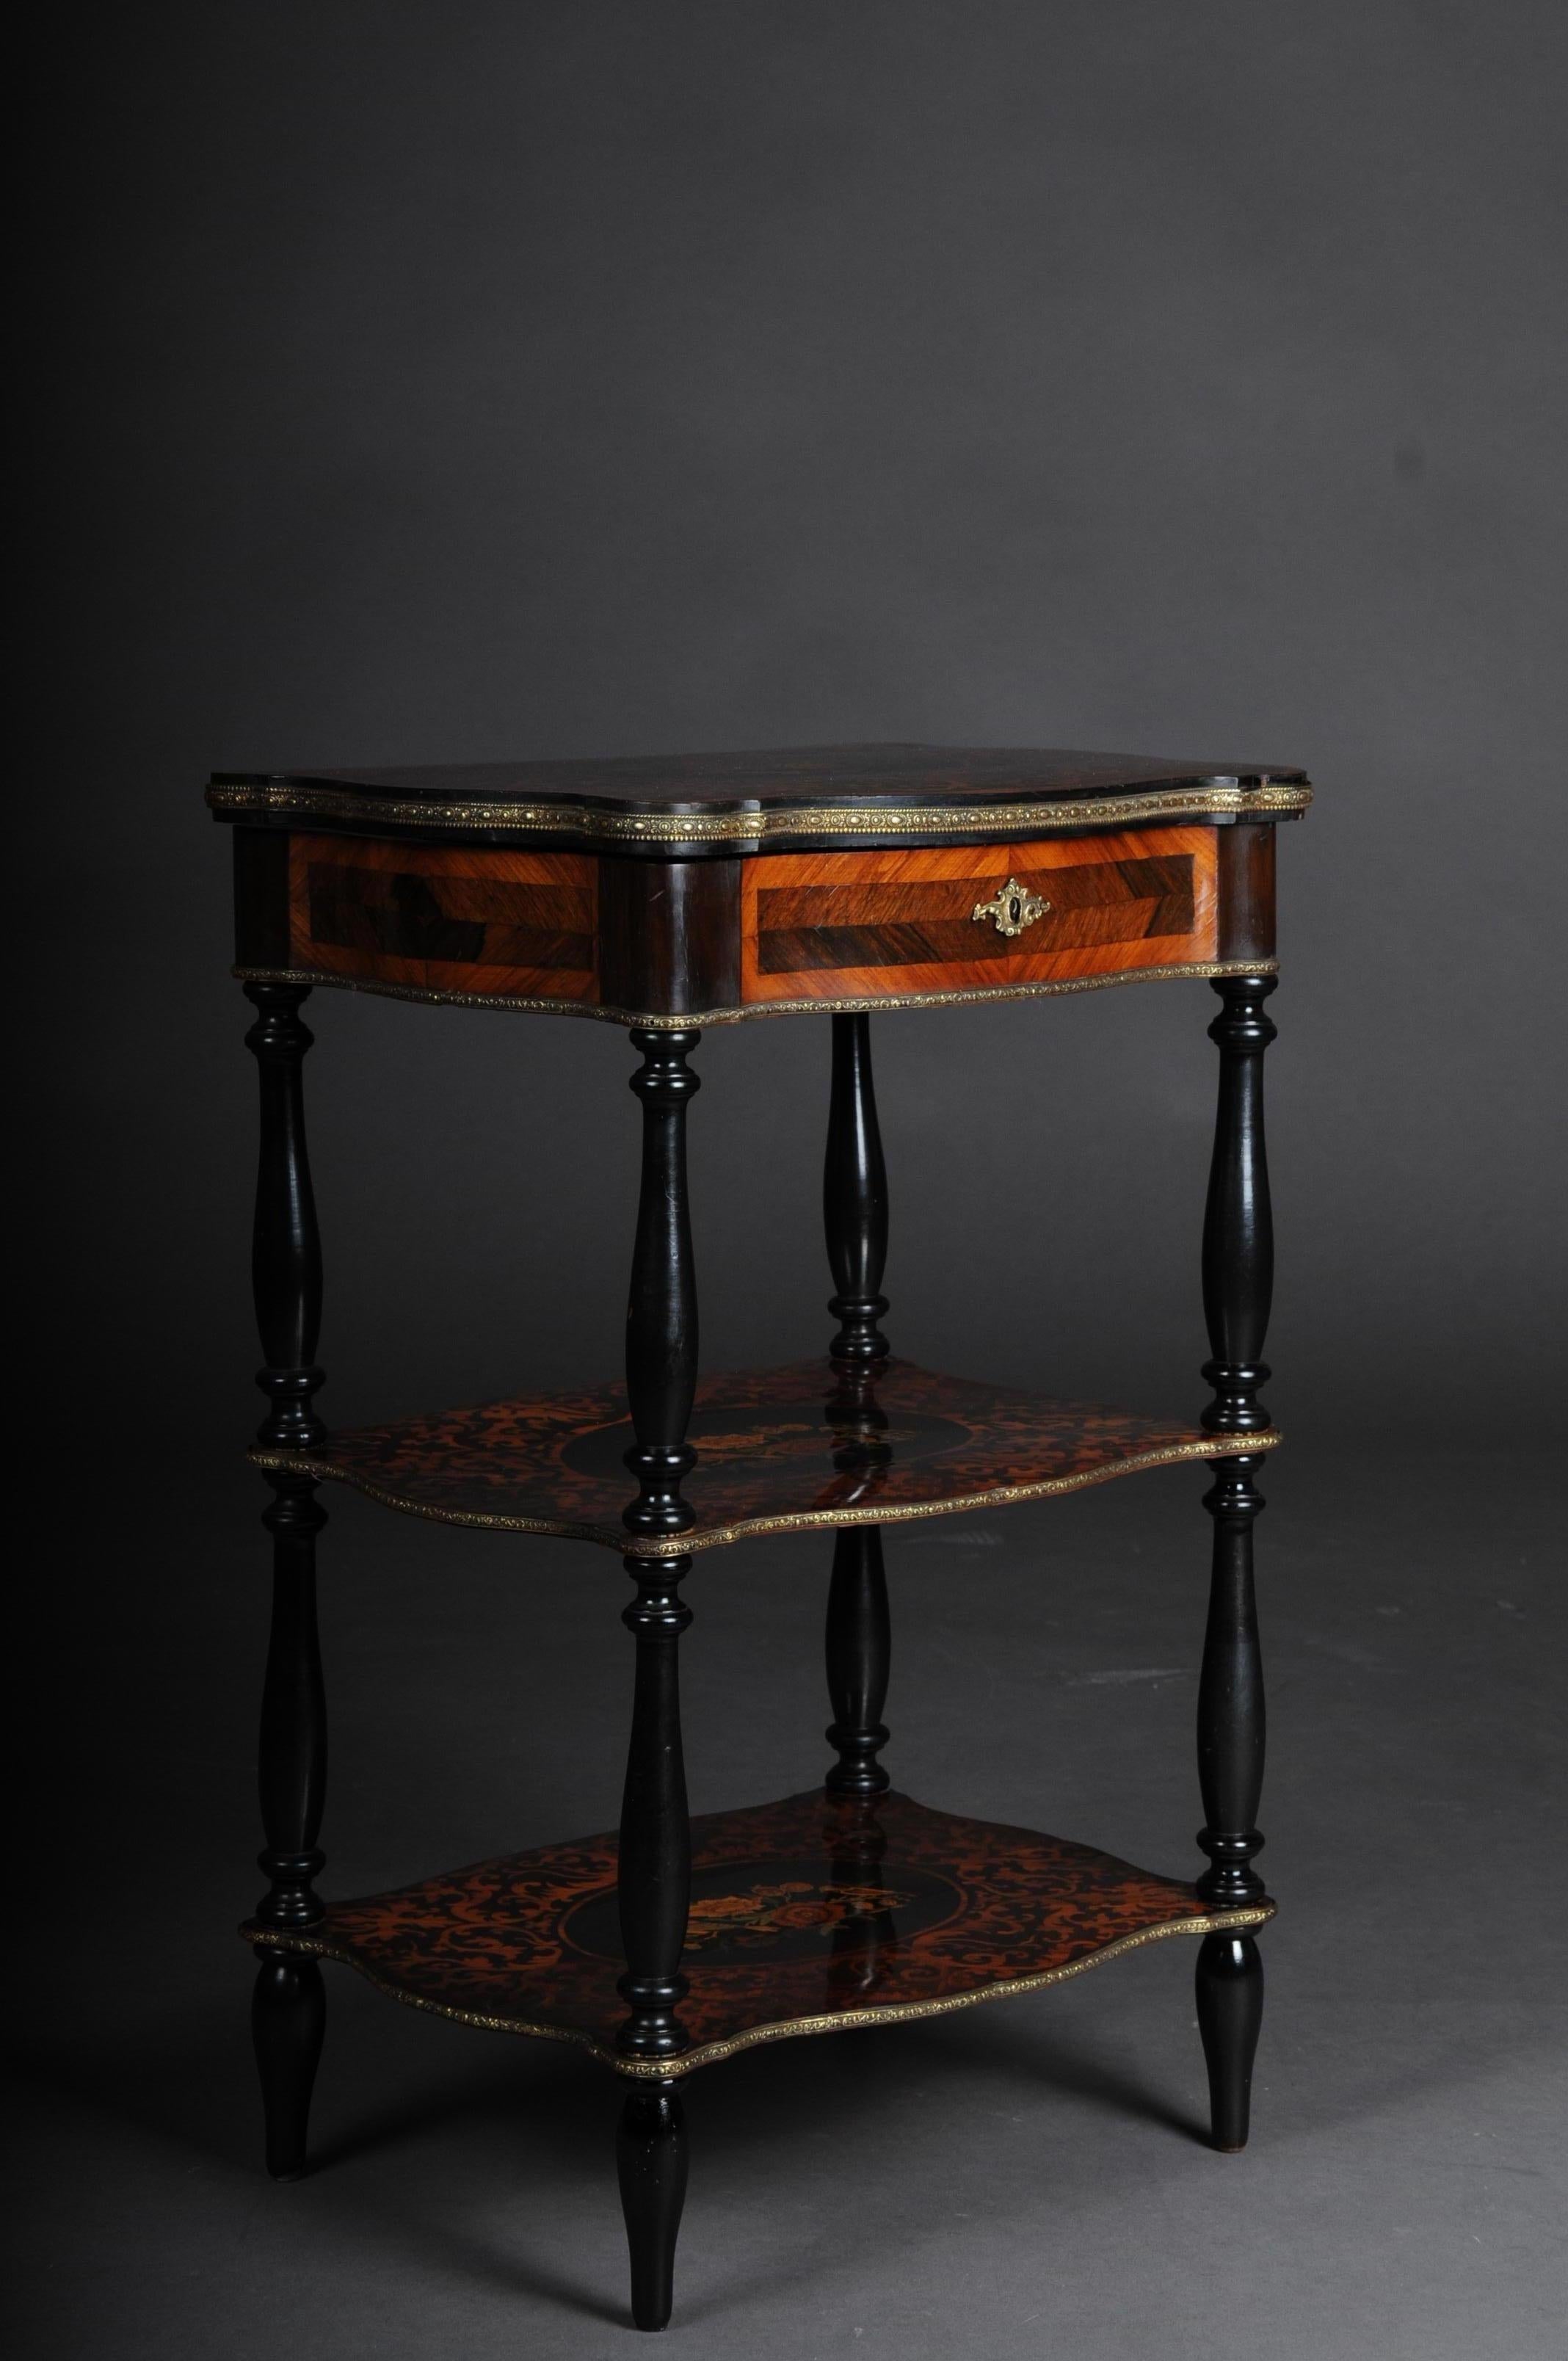 19th century Marquetry side table with jewelry box, circa 1870

3-tier side table with decorative key function. Solid wood with exotic inlays, partially ebonized. Rectangular body framed with brass fittings flanked by 4 blackened full columns.